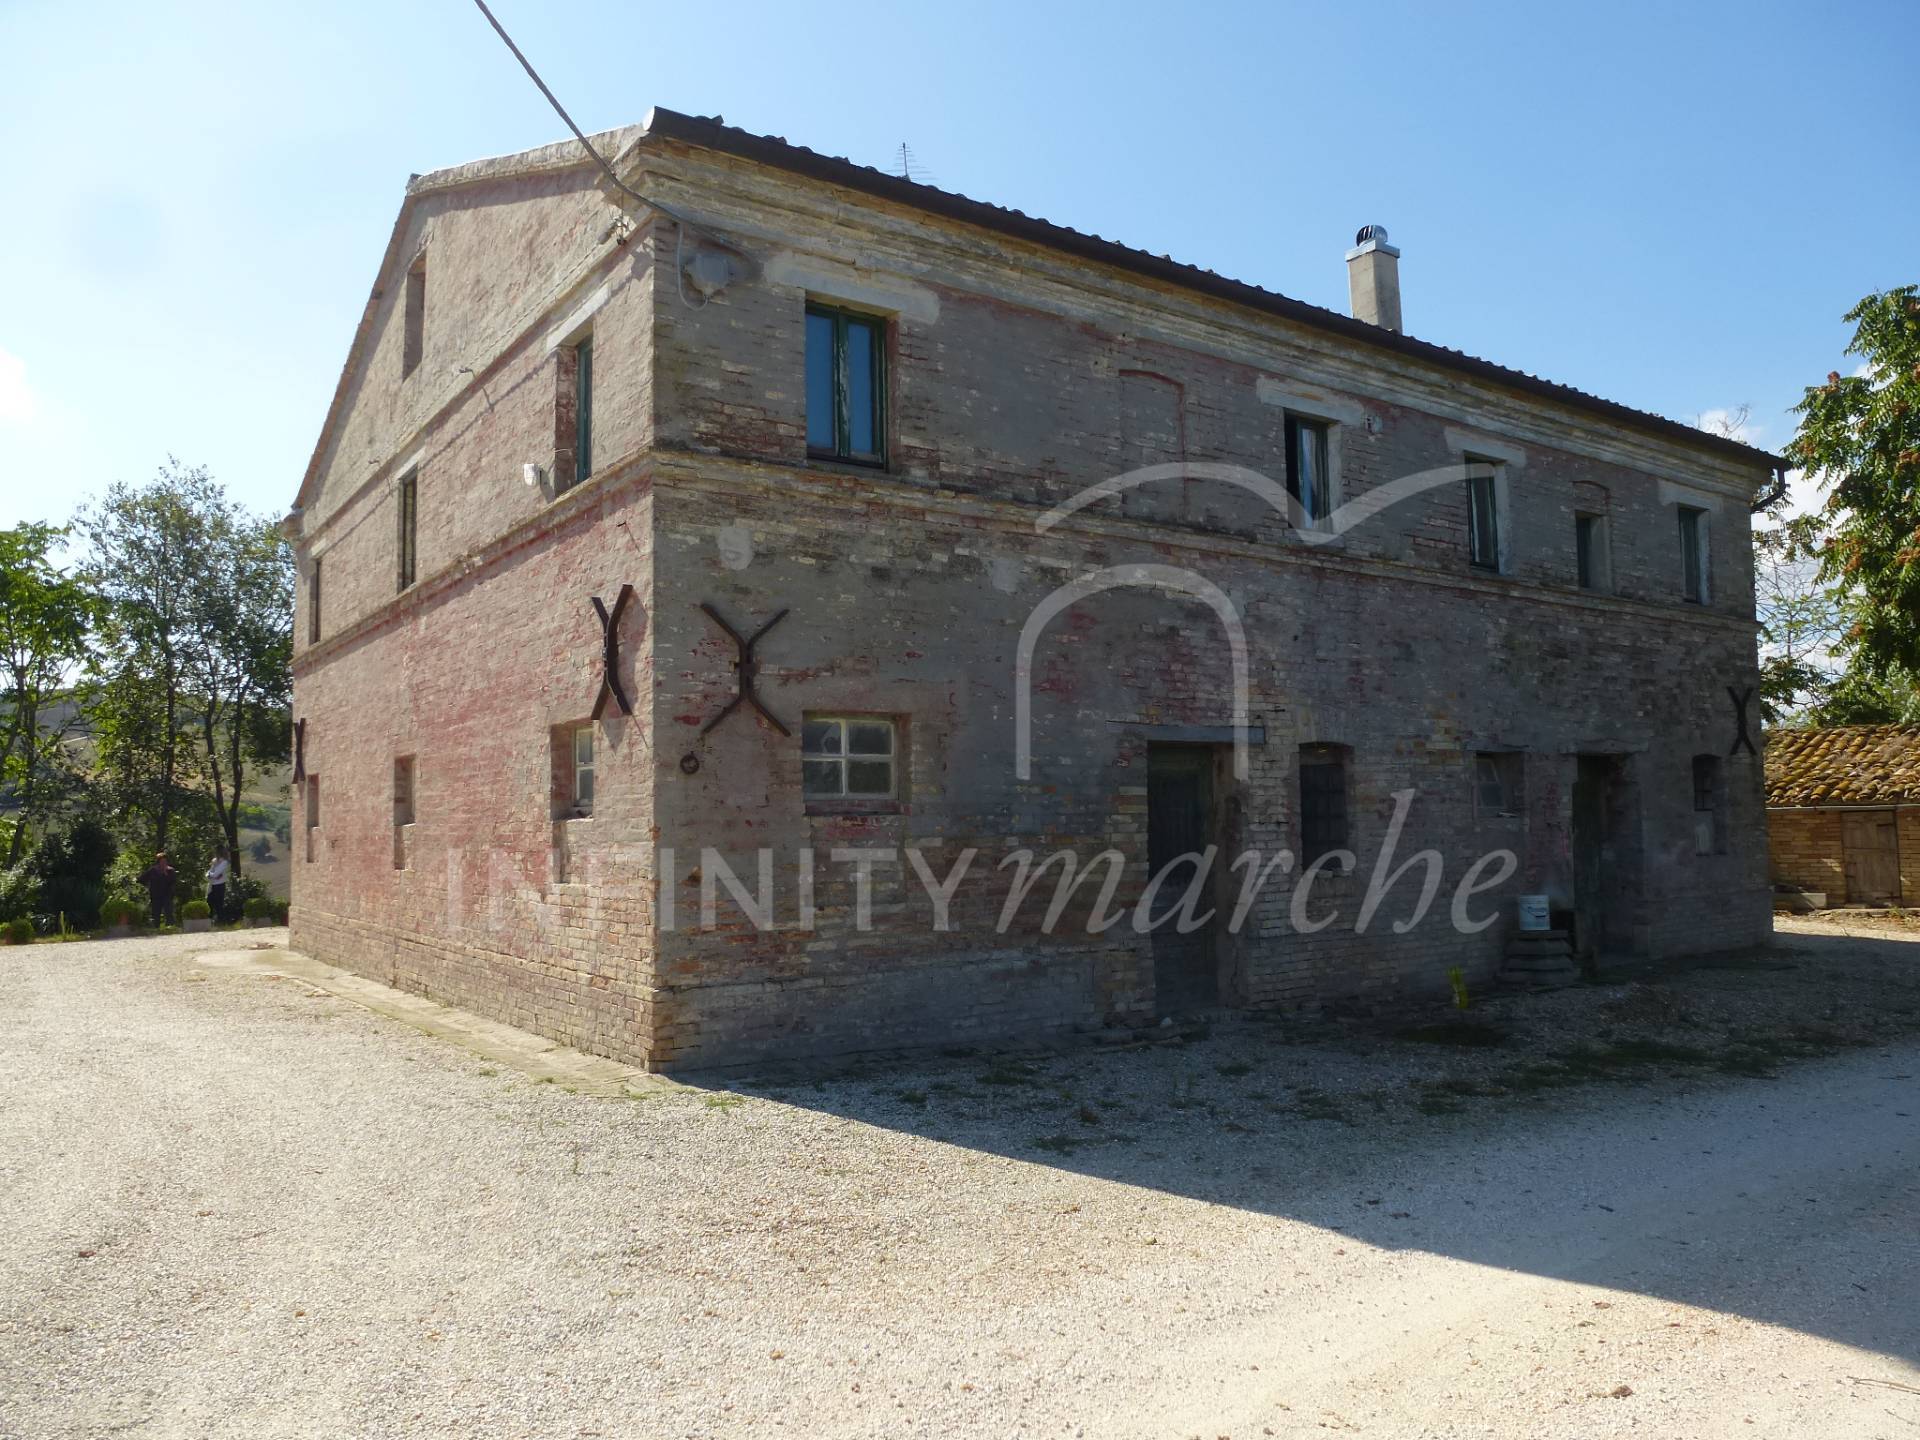 Country House in Montelupone (Macerata)